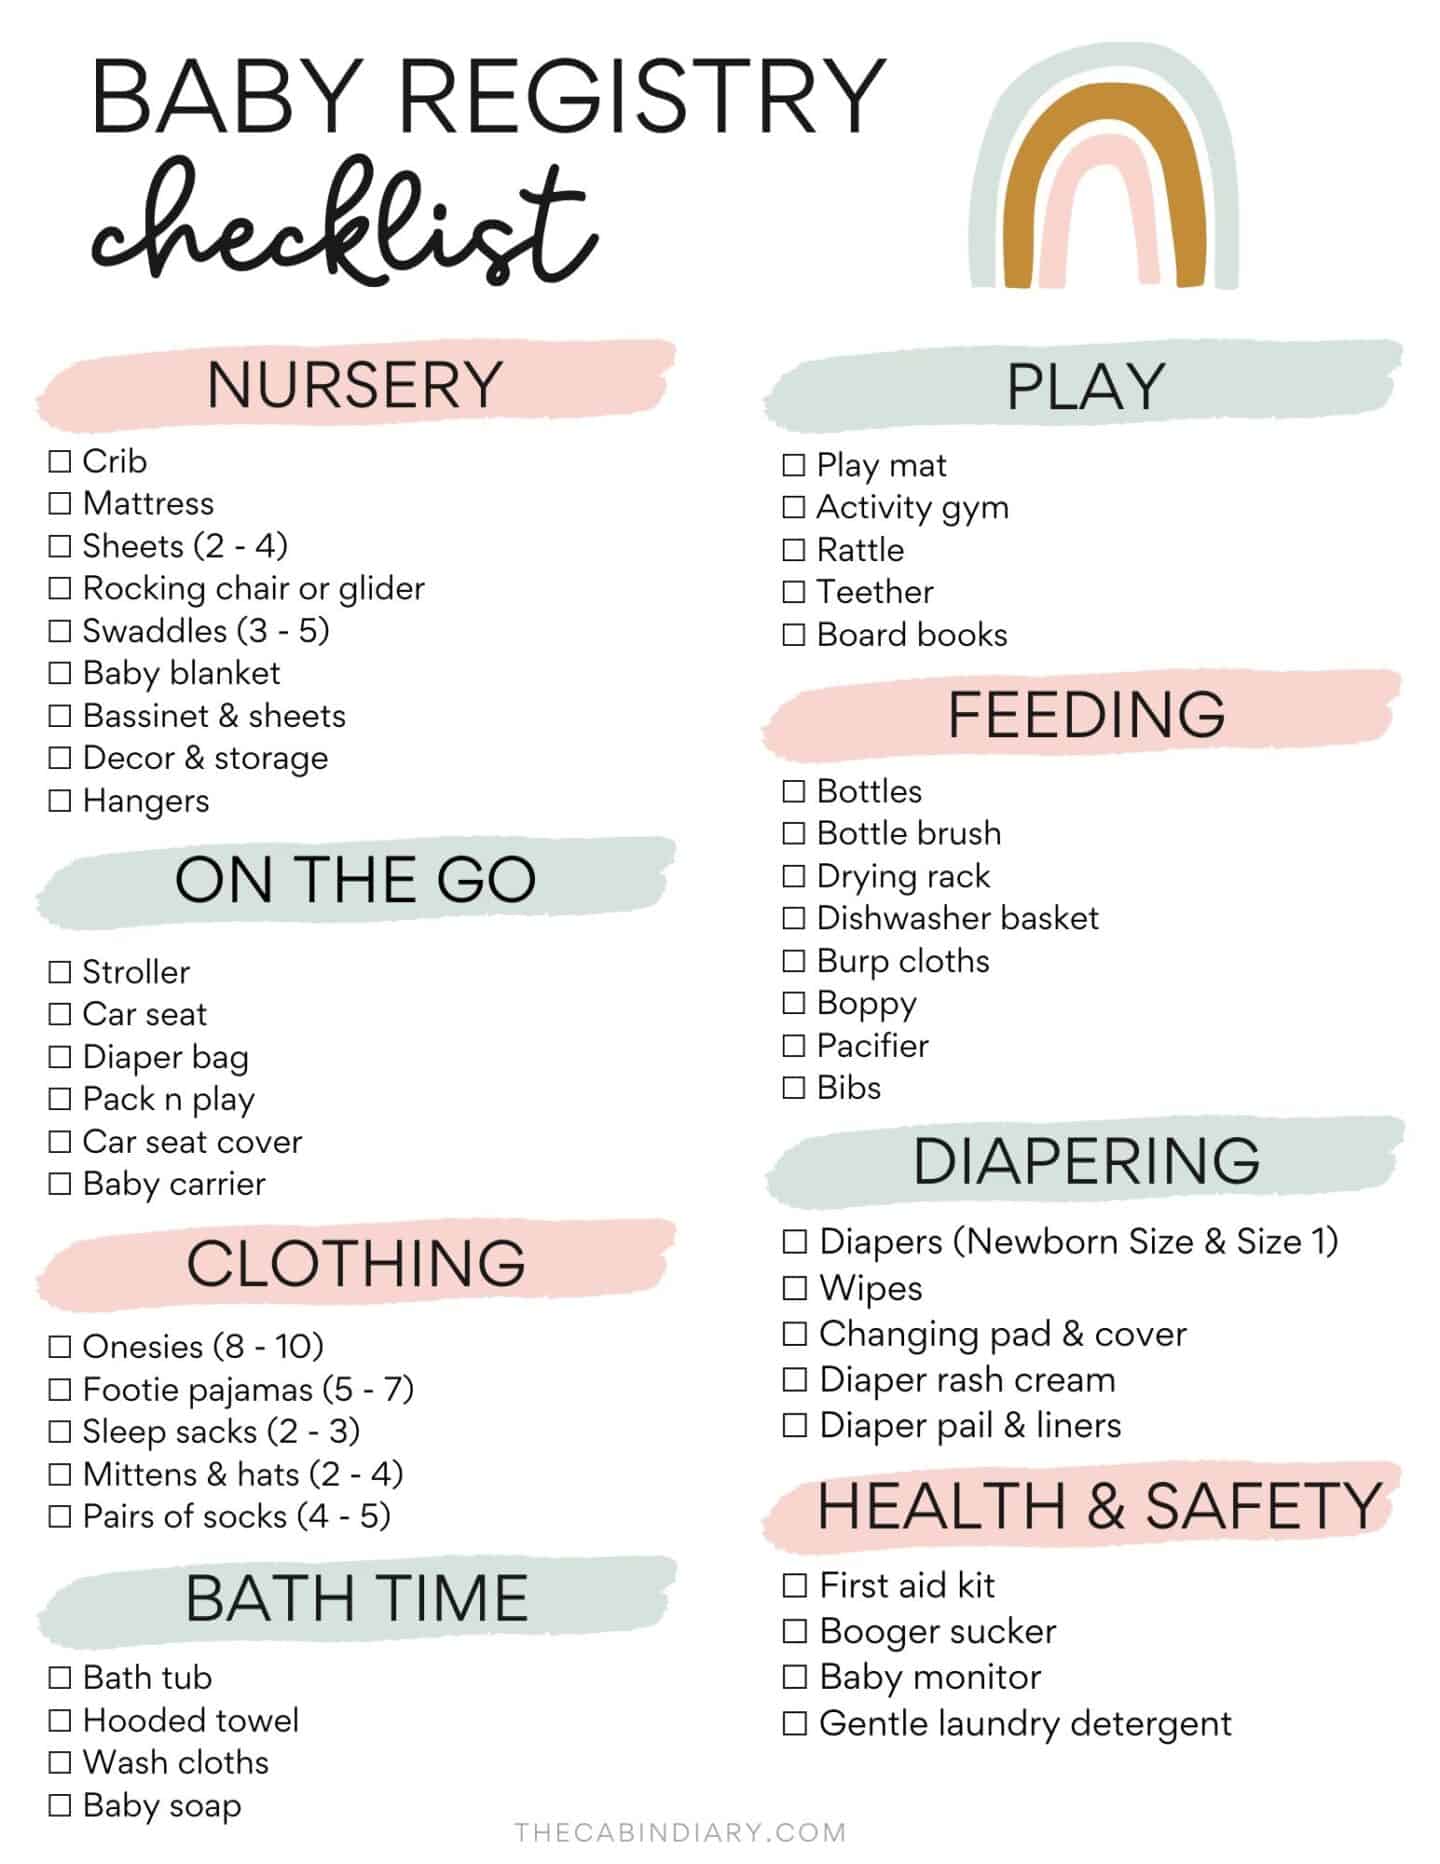 Baby Registry Checklist Must Haves For Printable Pdf | SexiezPicz Web Porn